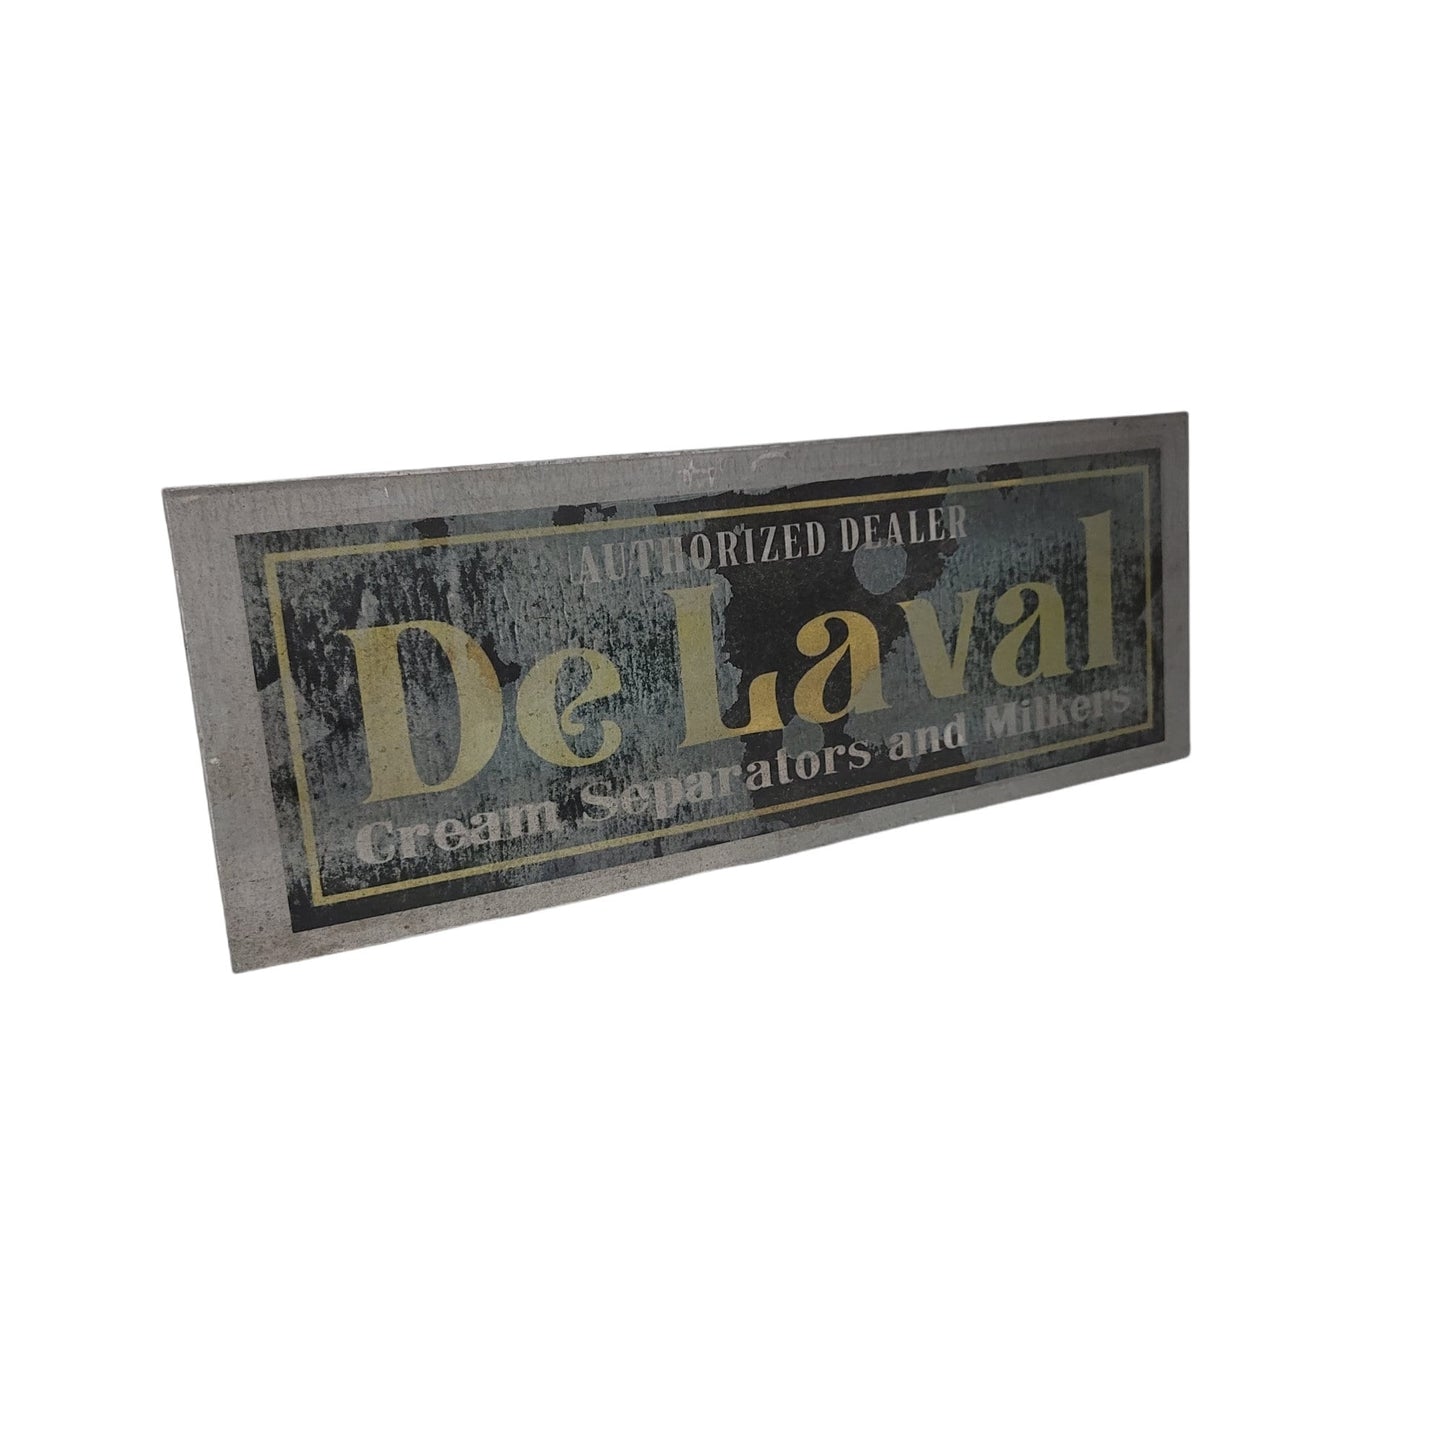 de laval separators and milkers sign weathered